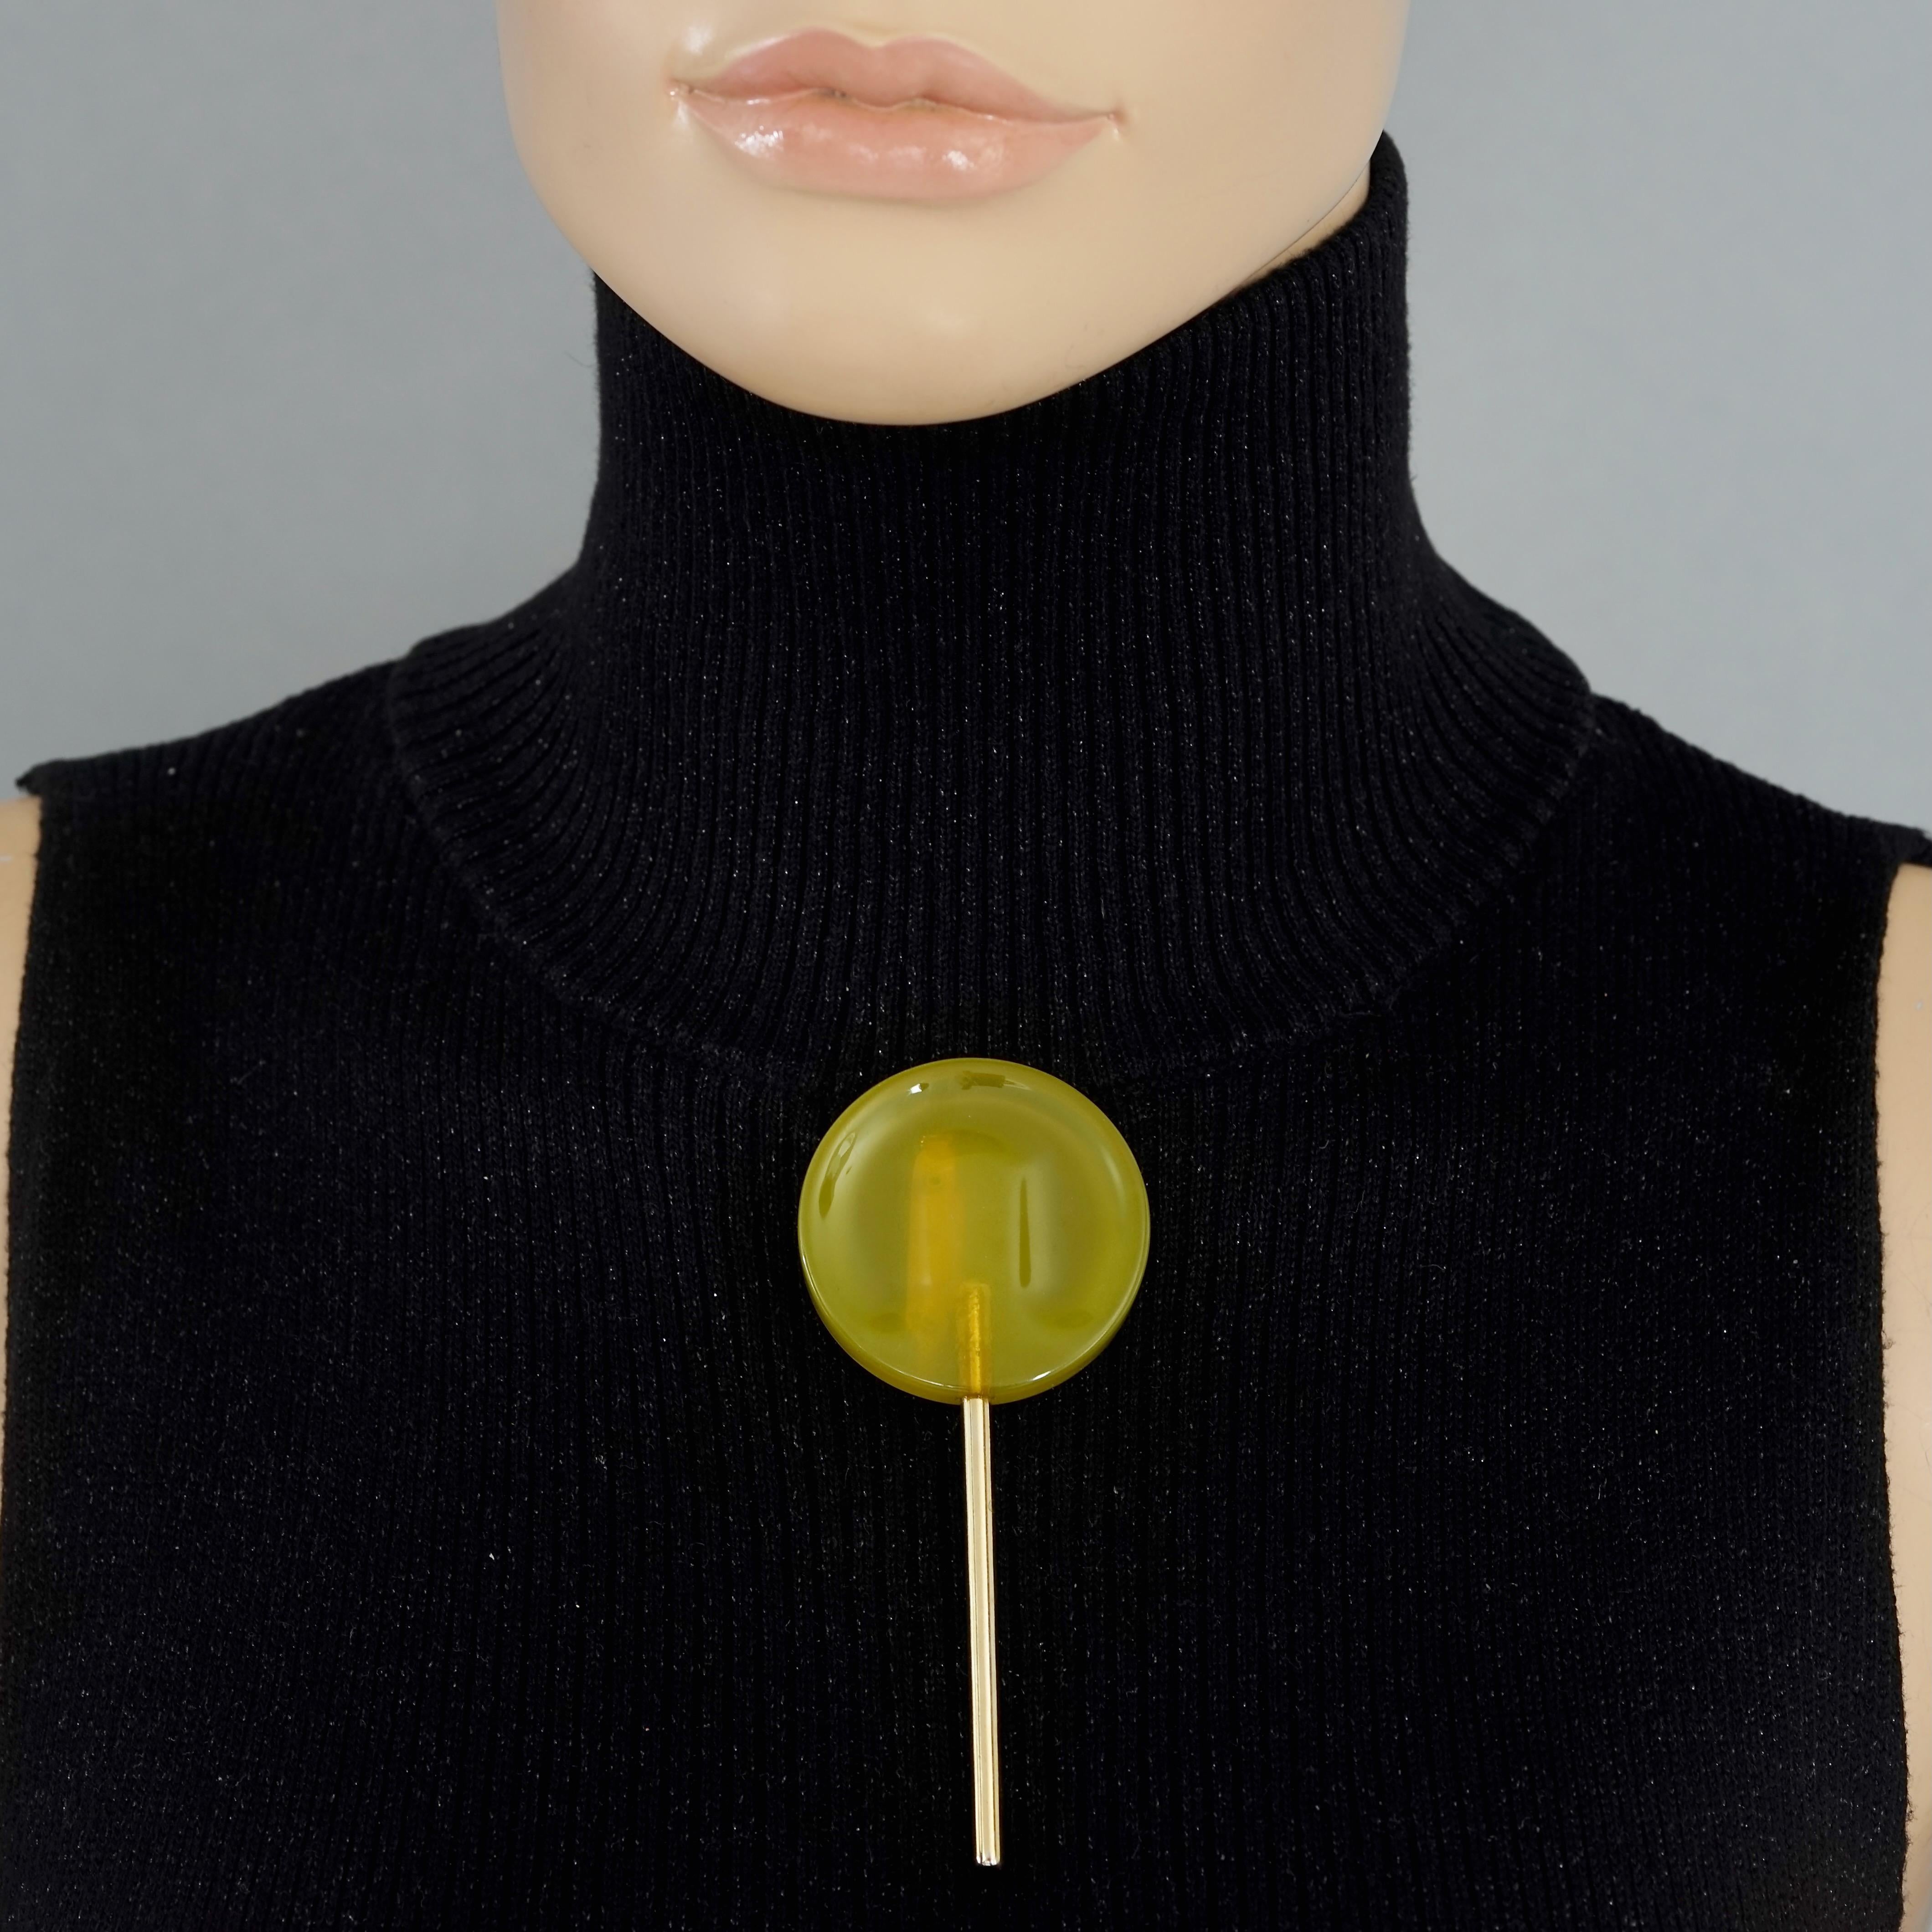 Vintage MOSCHINO Yellow Citrus Lollipop Candy Novelty Brooch

Measurements: 
Height: 4.13 inches (10.5 cm)
Diameter: 1.77 inches (4.5 cm)

Features:
- 100% Authentic MOSCHINO.
- Yellow Citrus Lollipop candy resin novelty brooch.
- Engraved MOSCHINO